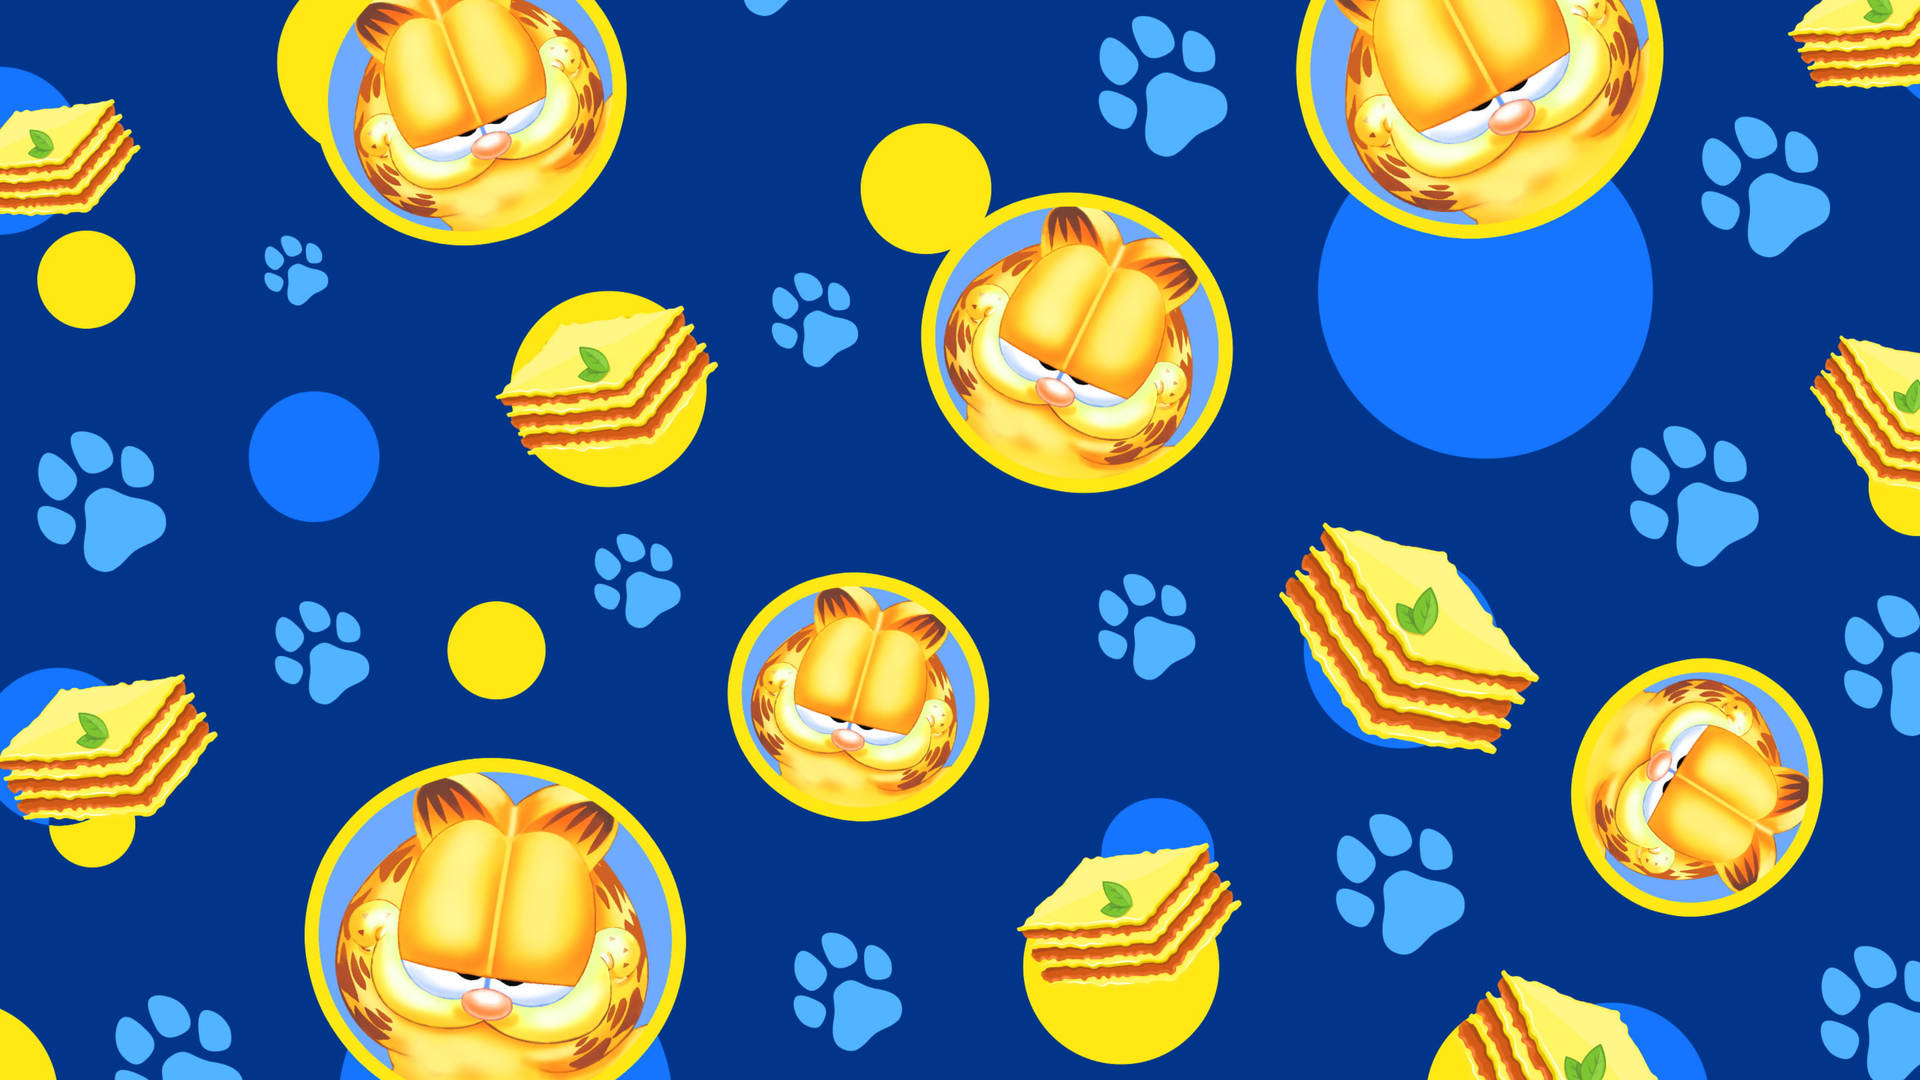 4096X2304 Paw Print Wallpaper and Background